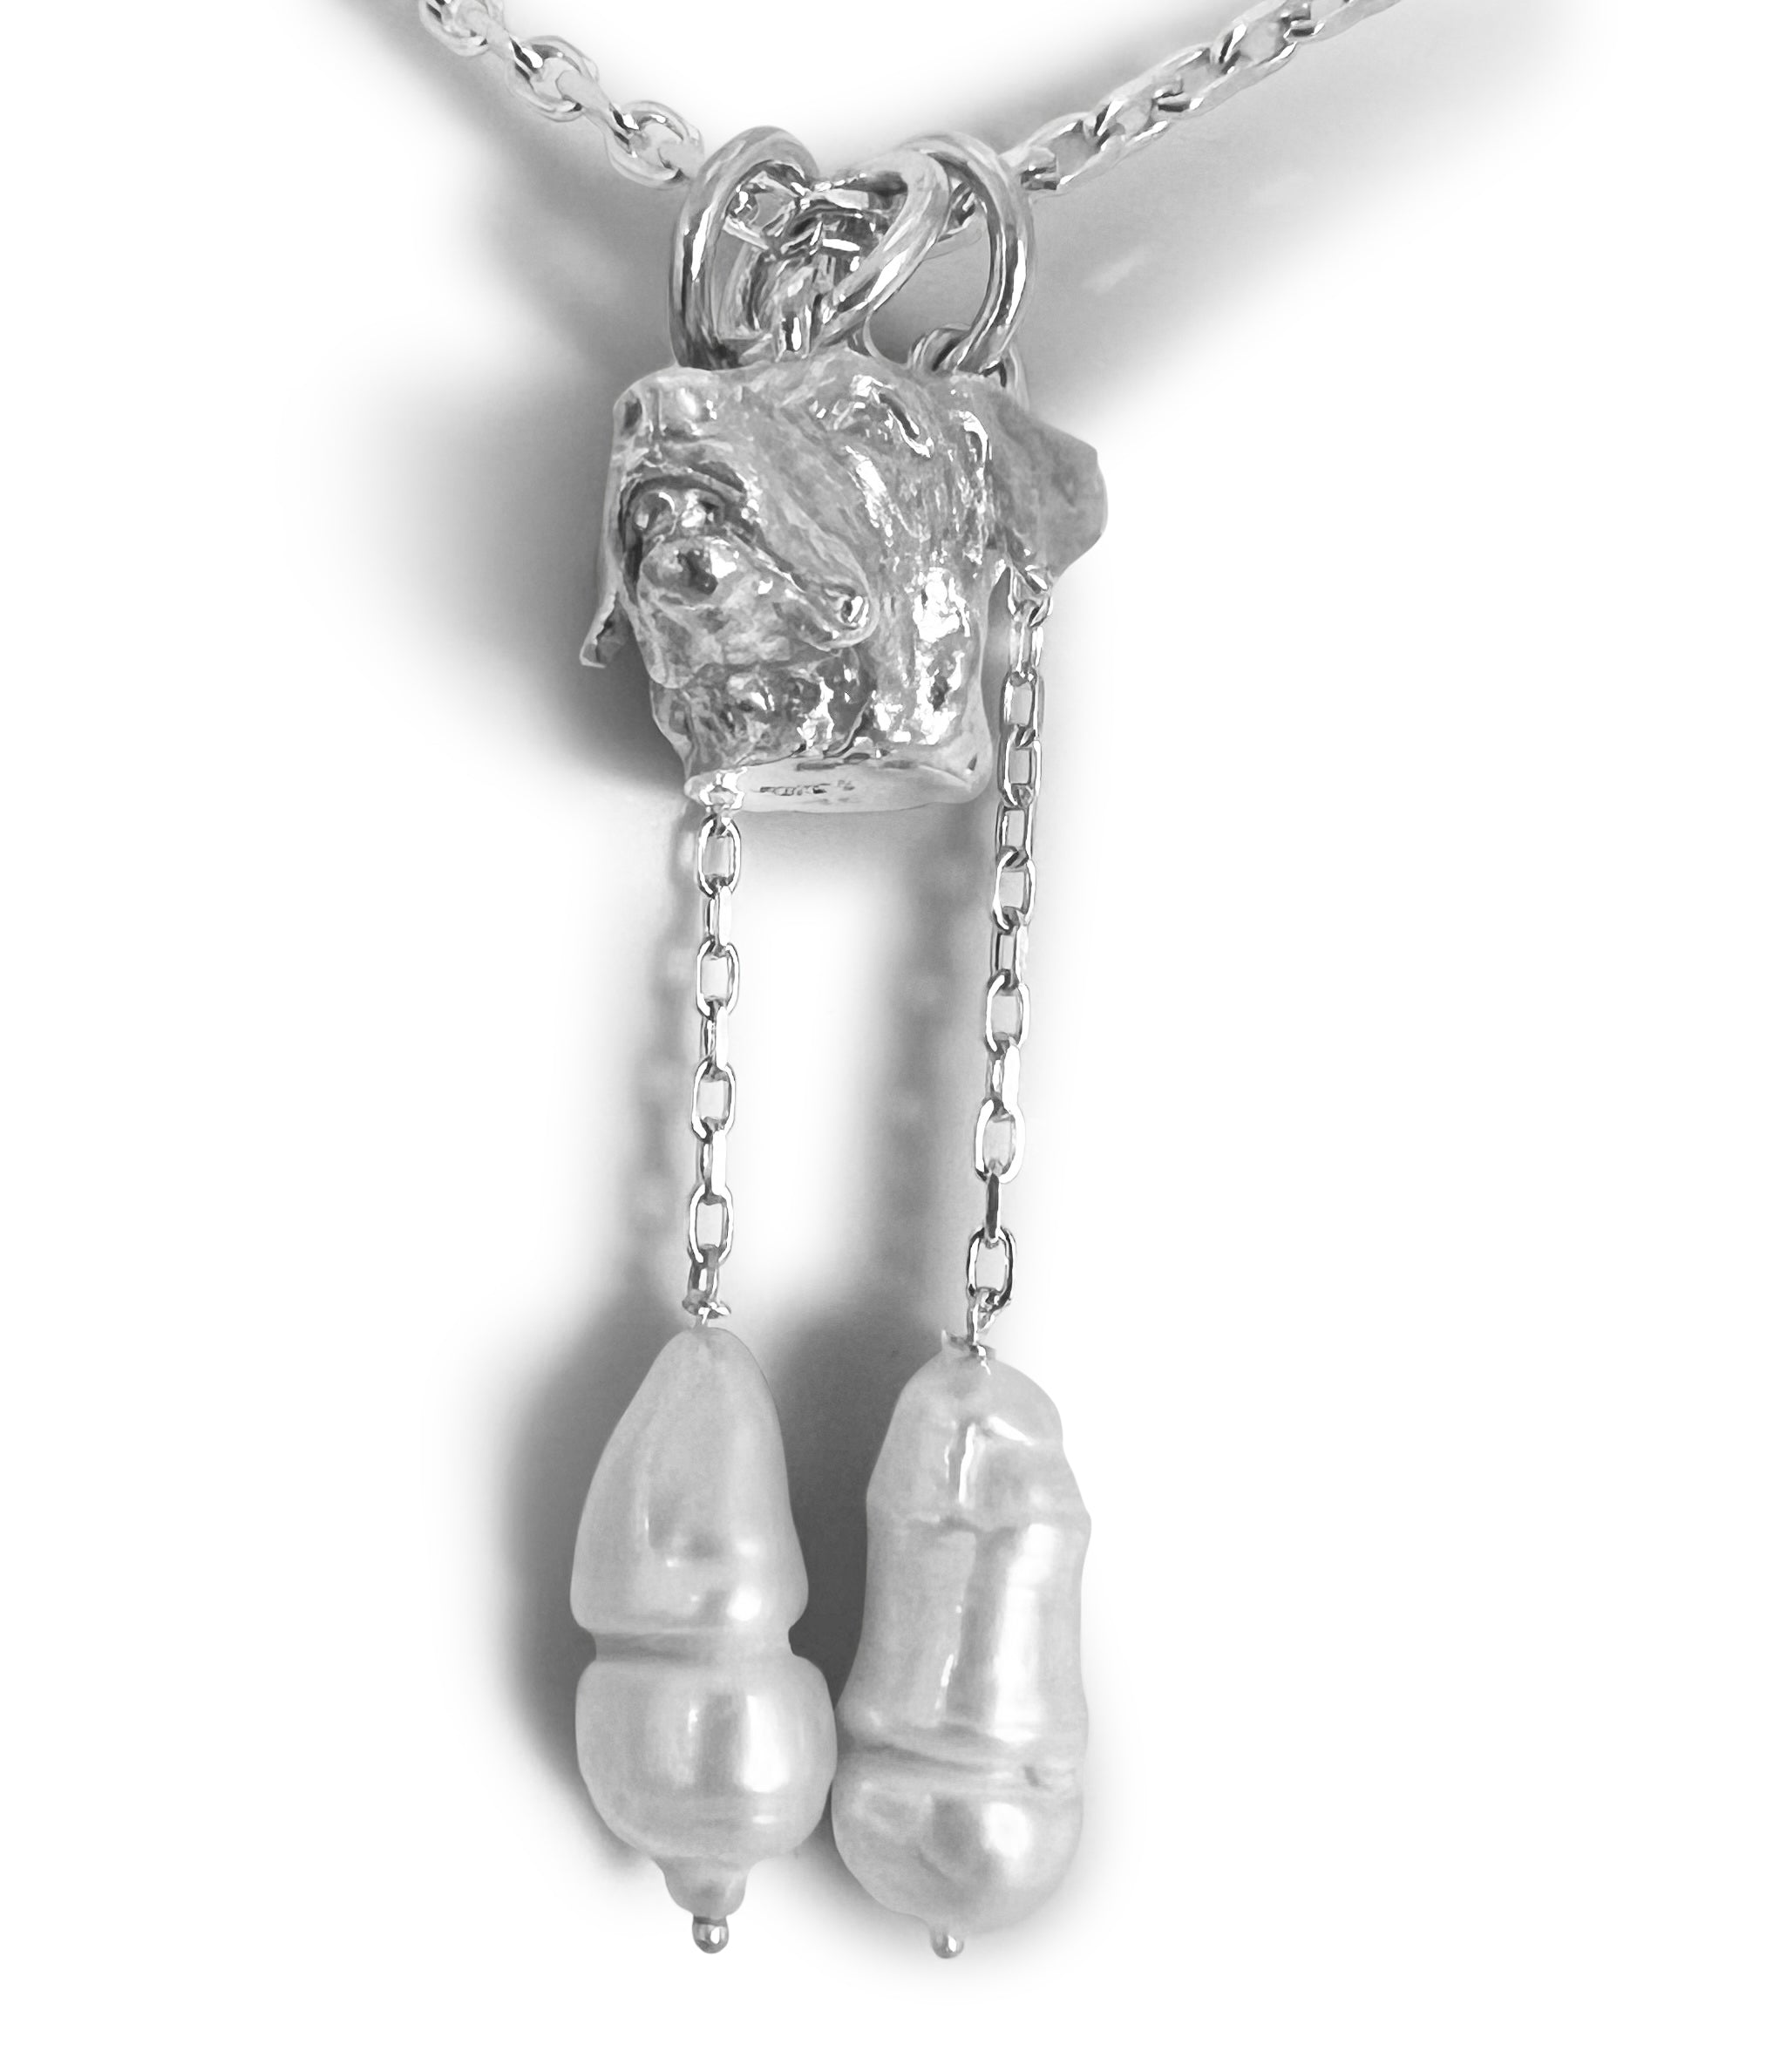 Rottweiler Pendant with Freshwater Pearls by Paul Eaton Sculptor/Silversmilth